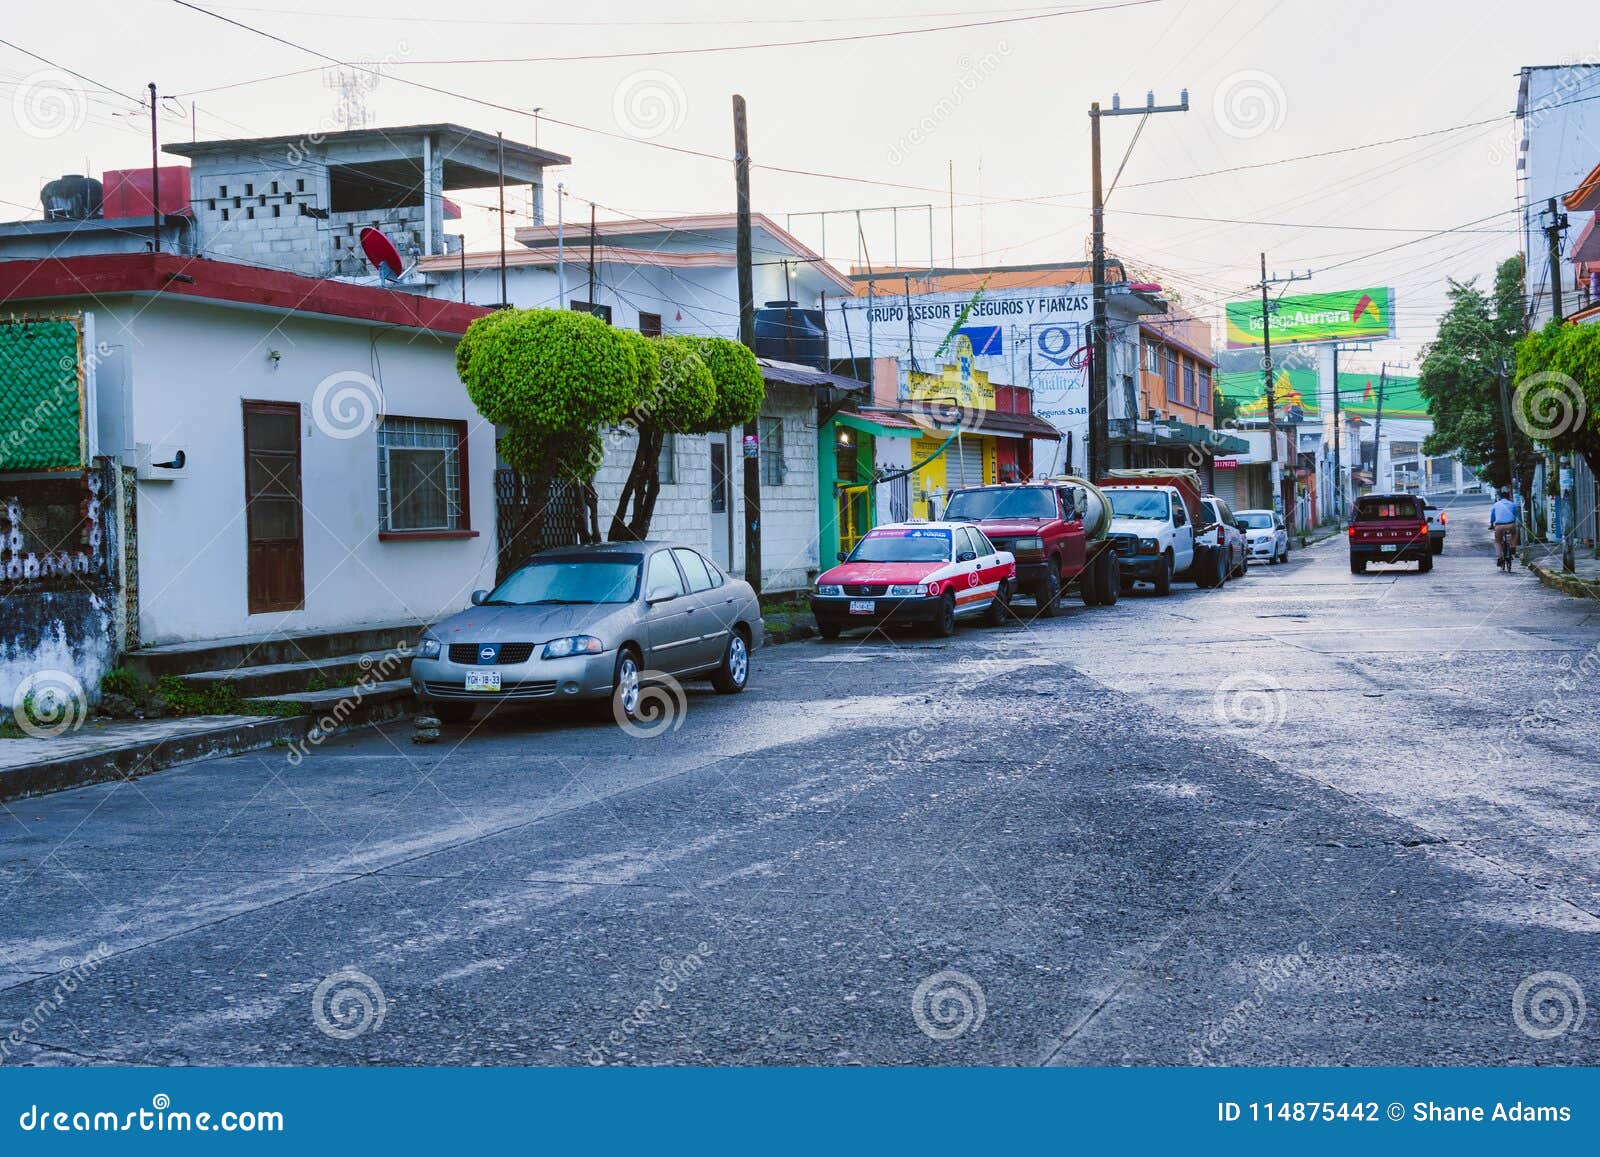 Mexican Street Scene. Details of the street at Tuxpan, Veracruz state in Mexico.